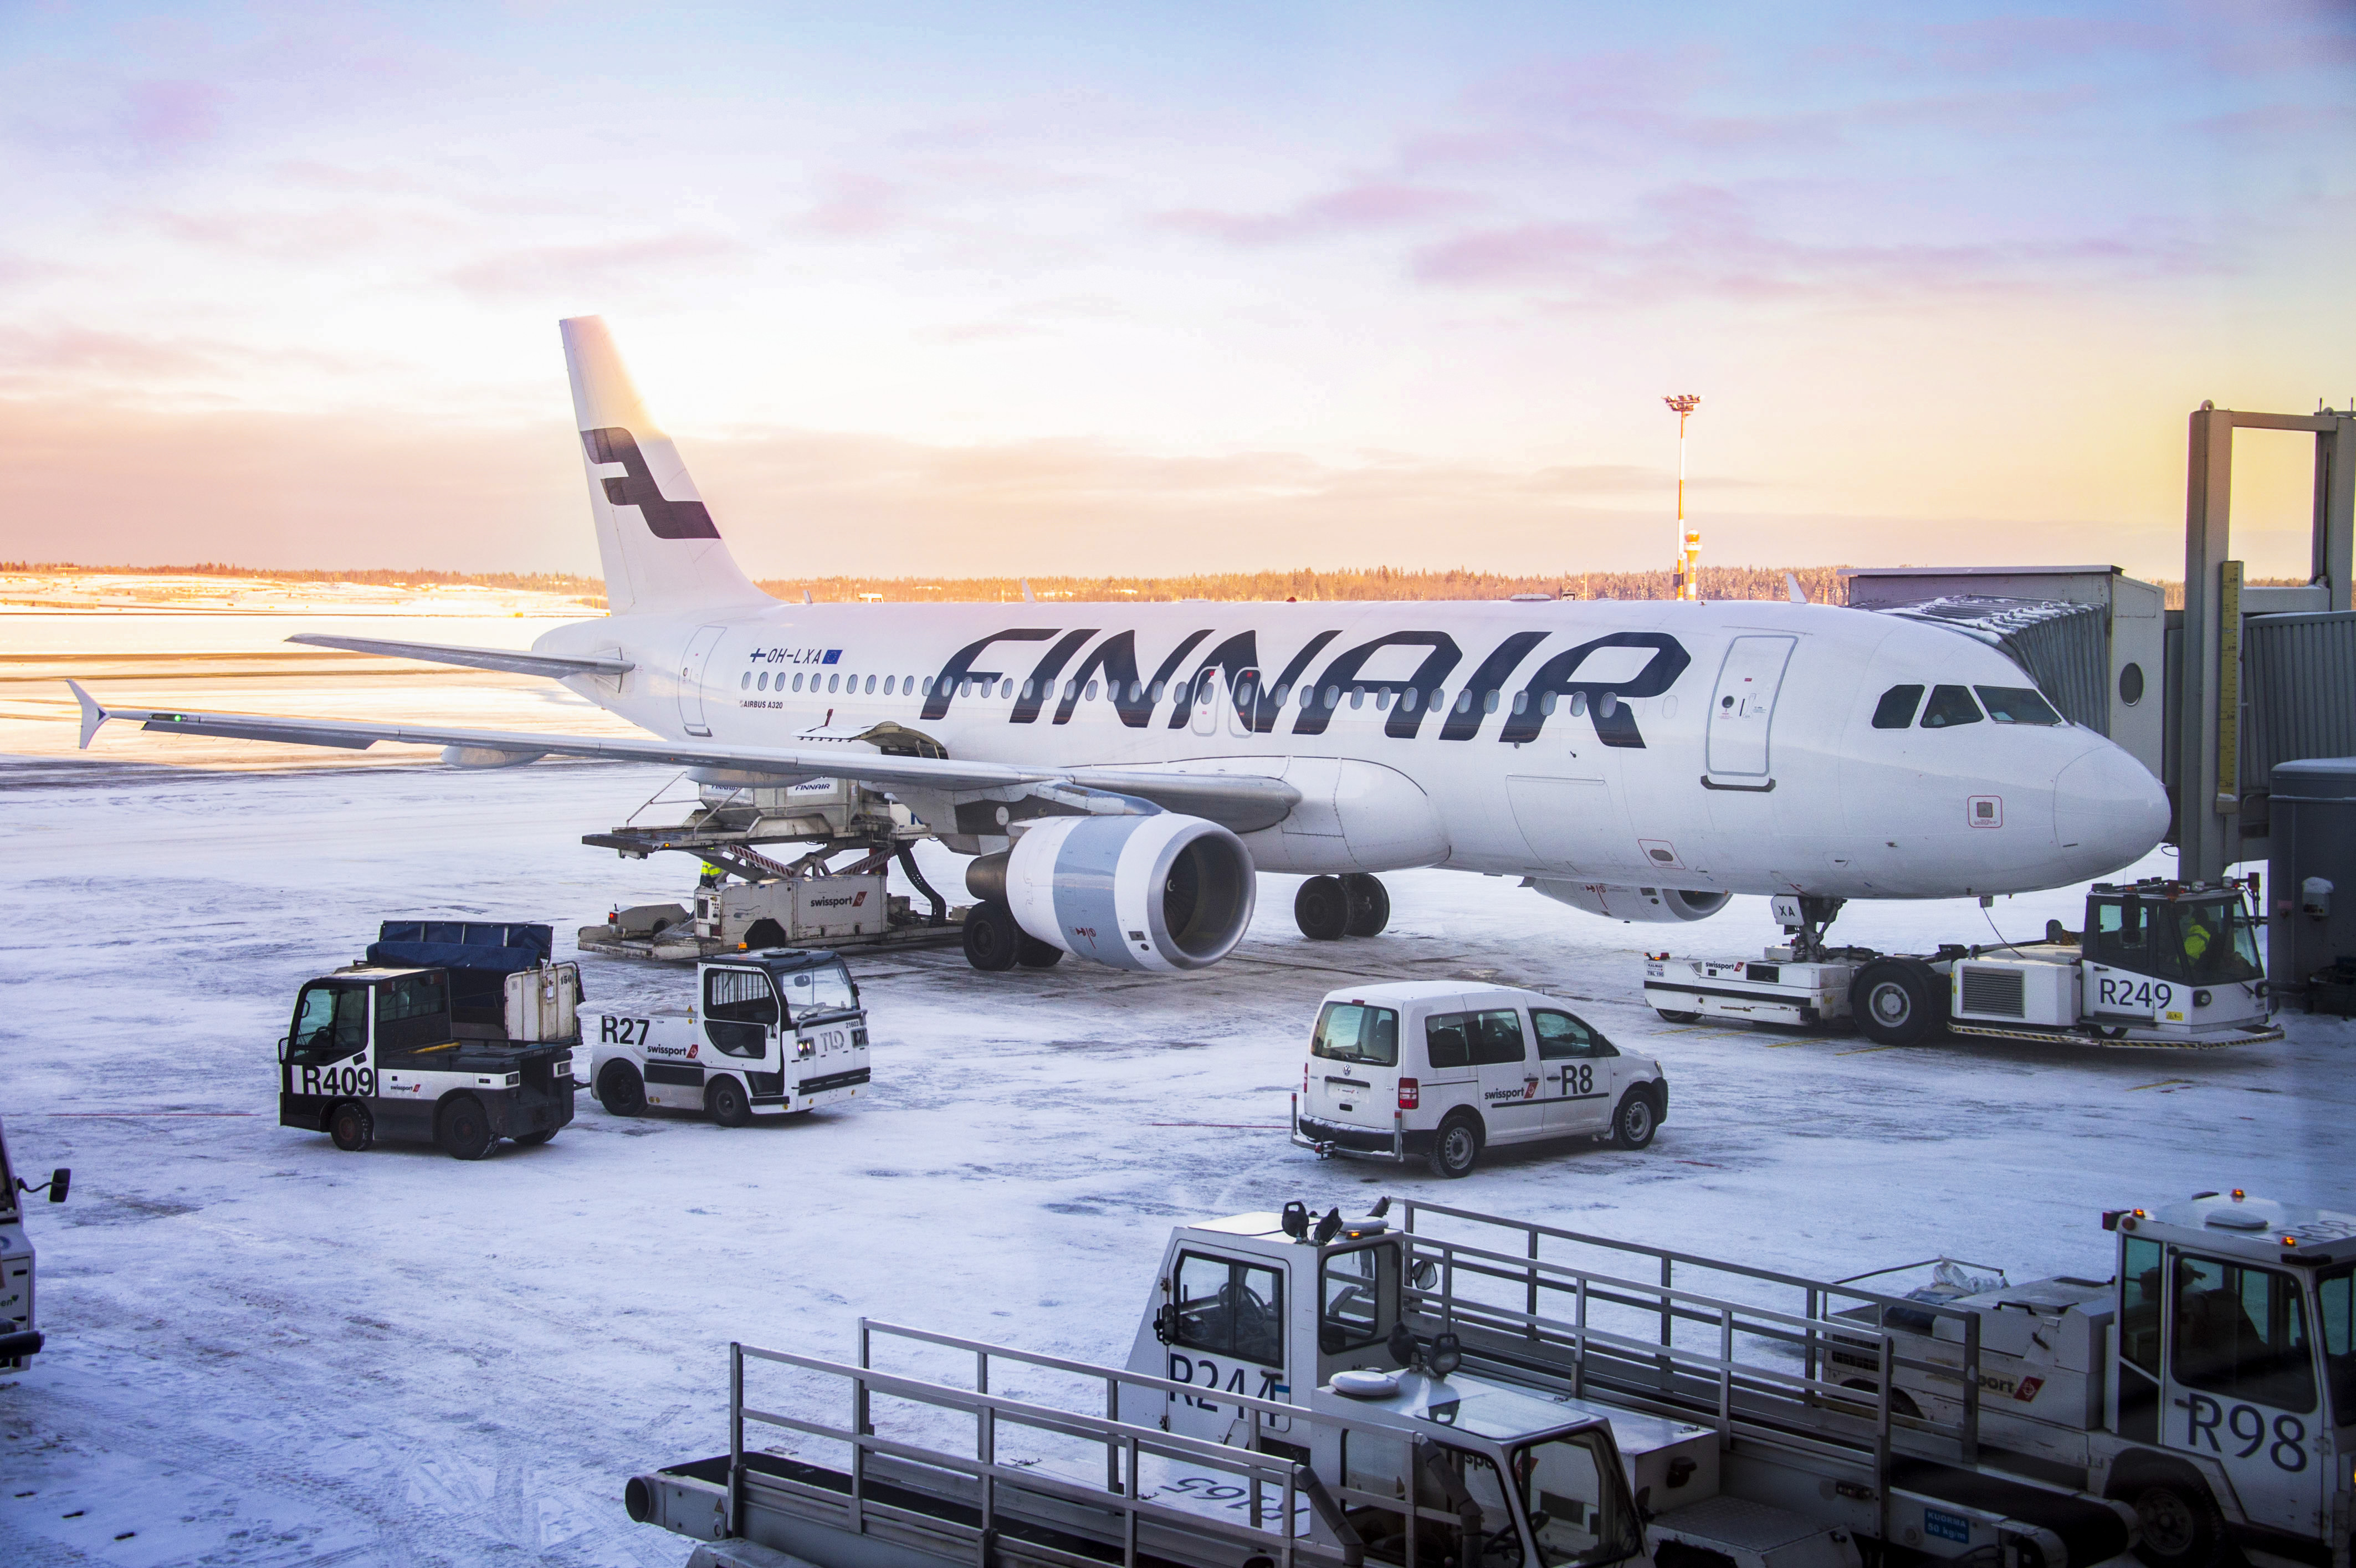 Finnair’s share price collapses when Russia closes airspace